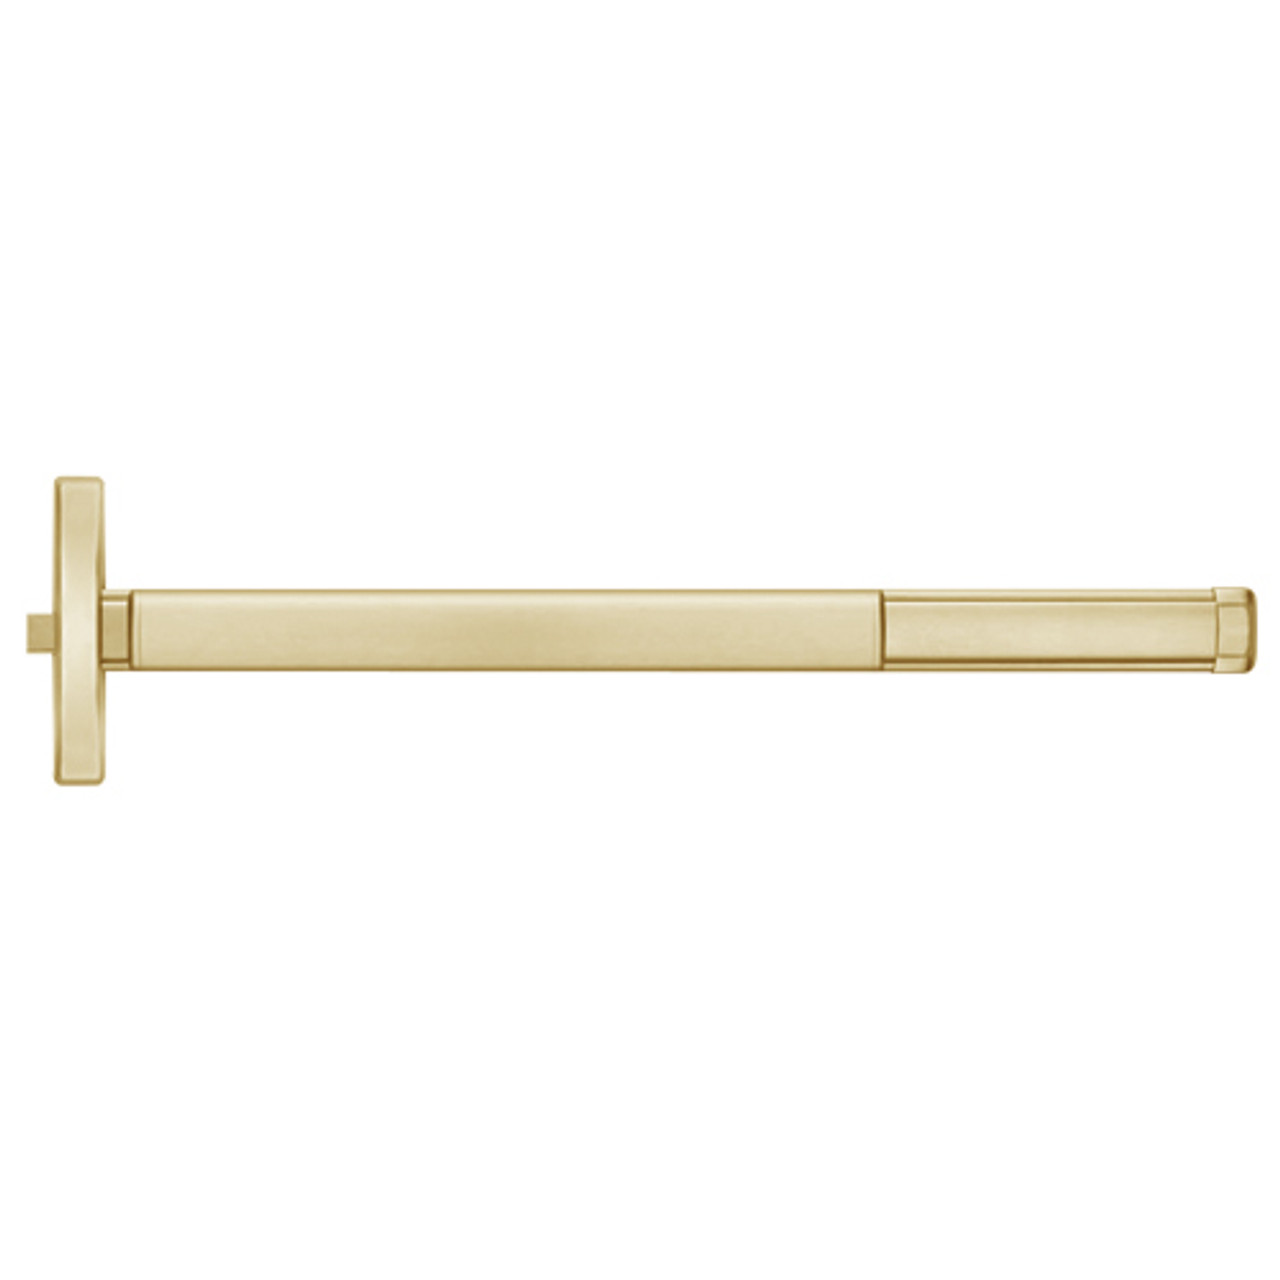 DEFL2402-606-36 PHI 2400 Series Fire Rated Apex Rim Exit Device with Delayed Egress Prepped for Dummy Trim in Satin Brass Finish